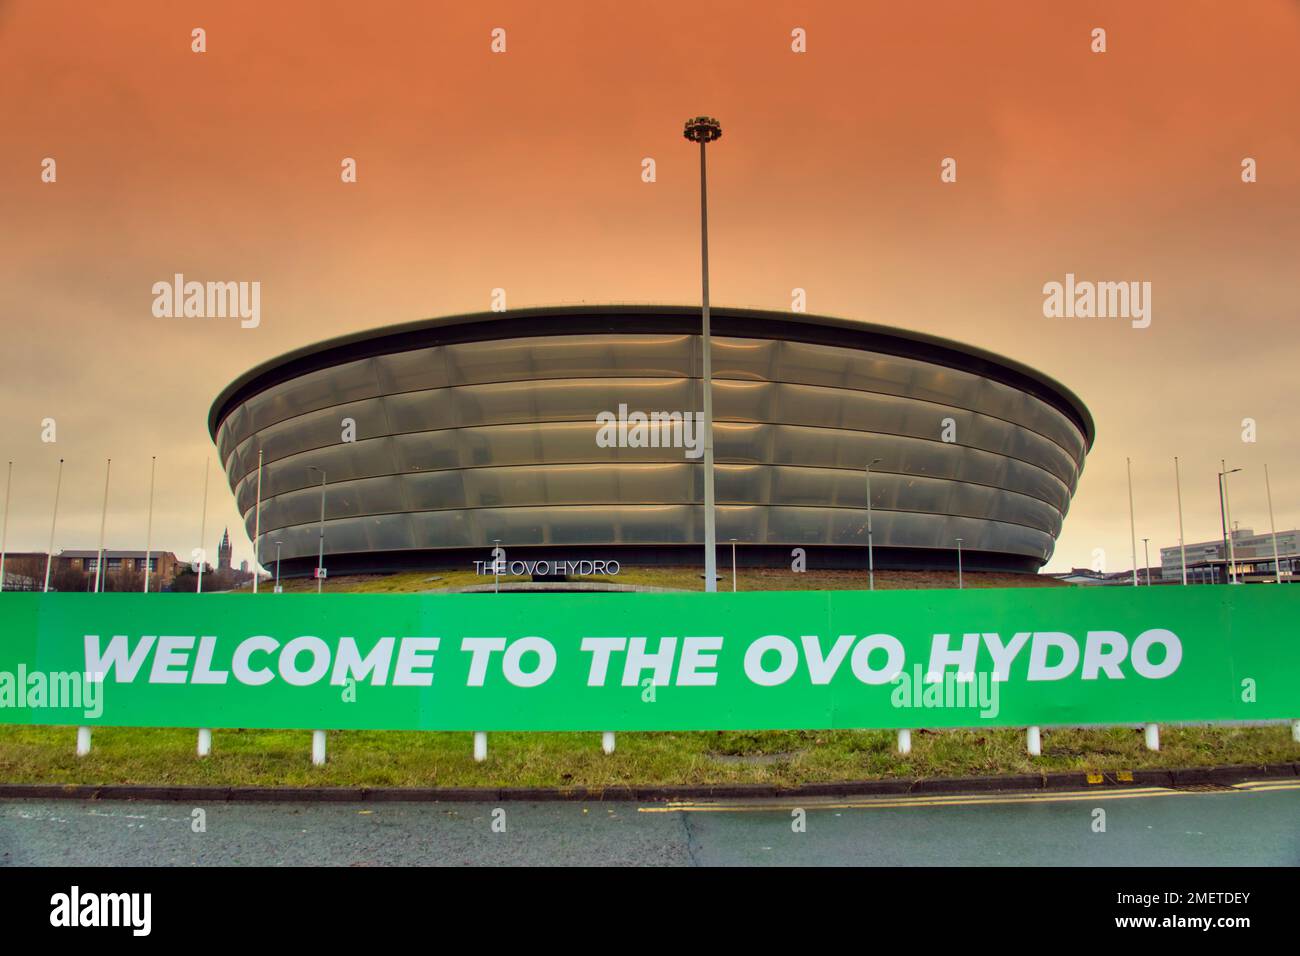 OVO Hydro Arena Exhibition Way, Stobcross Rd, Glasgow G3 8YW Banque D'Images